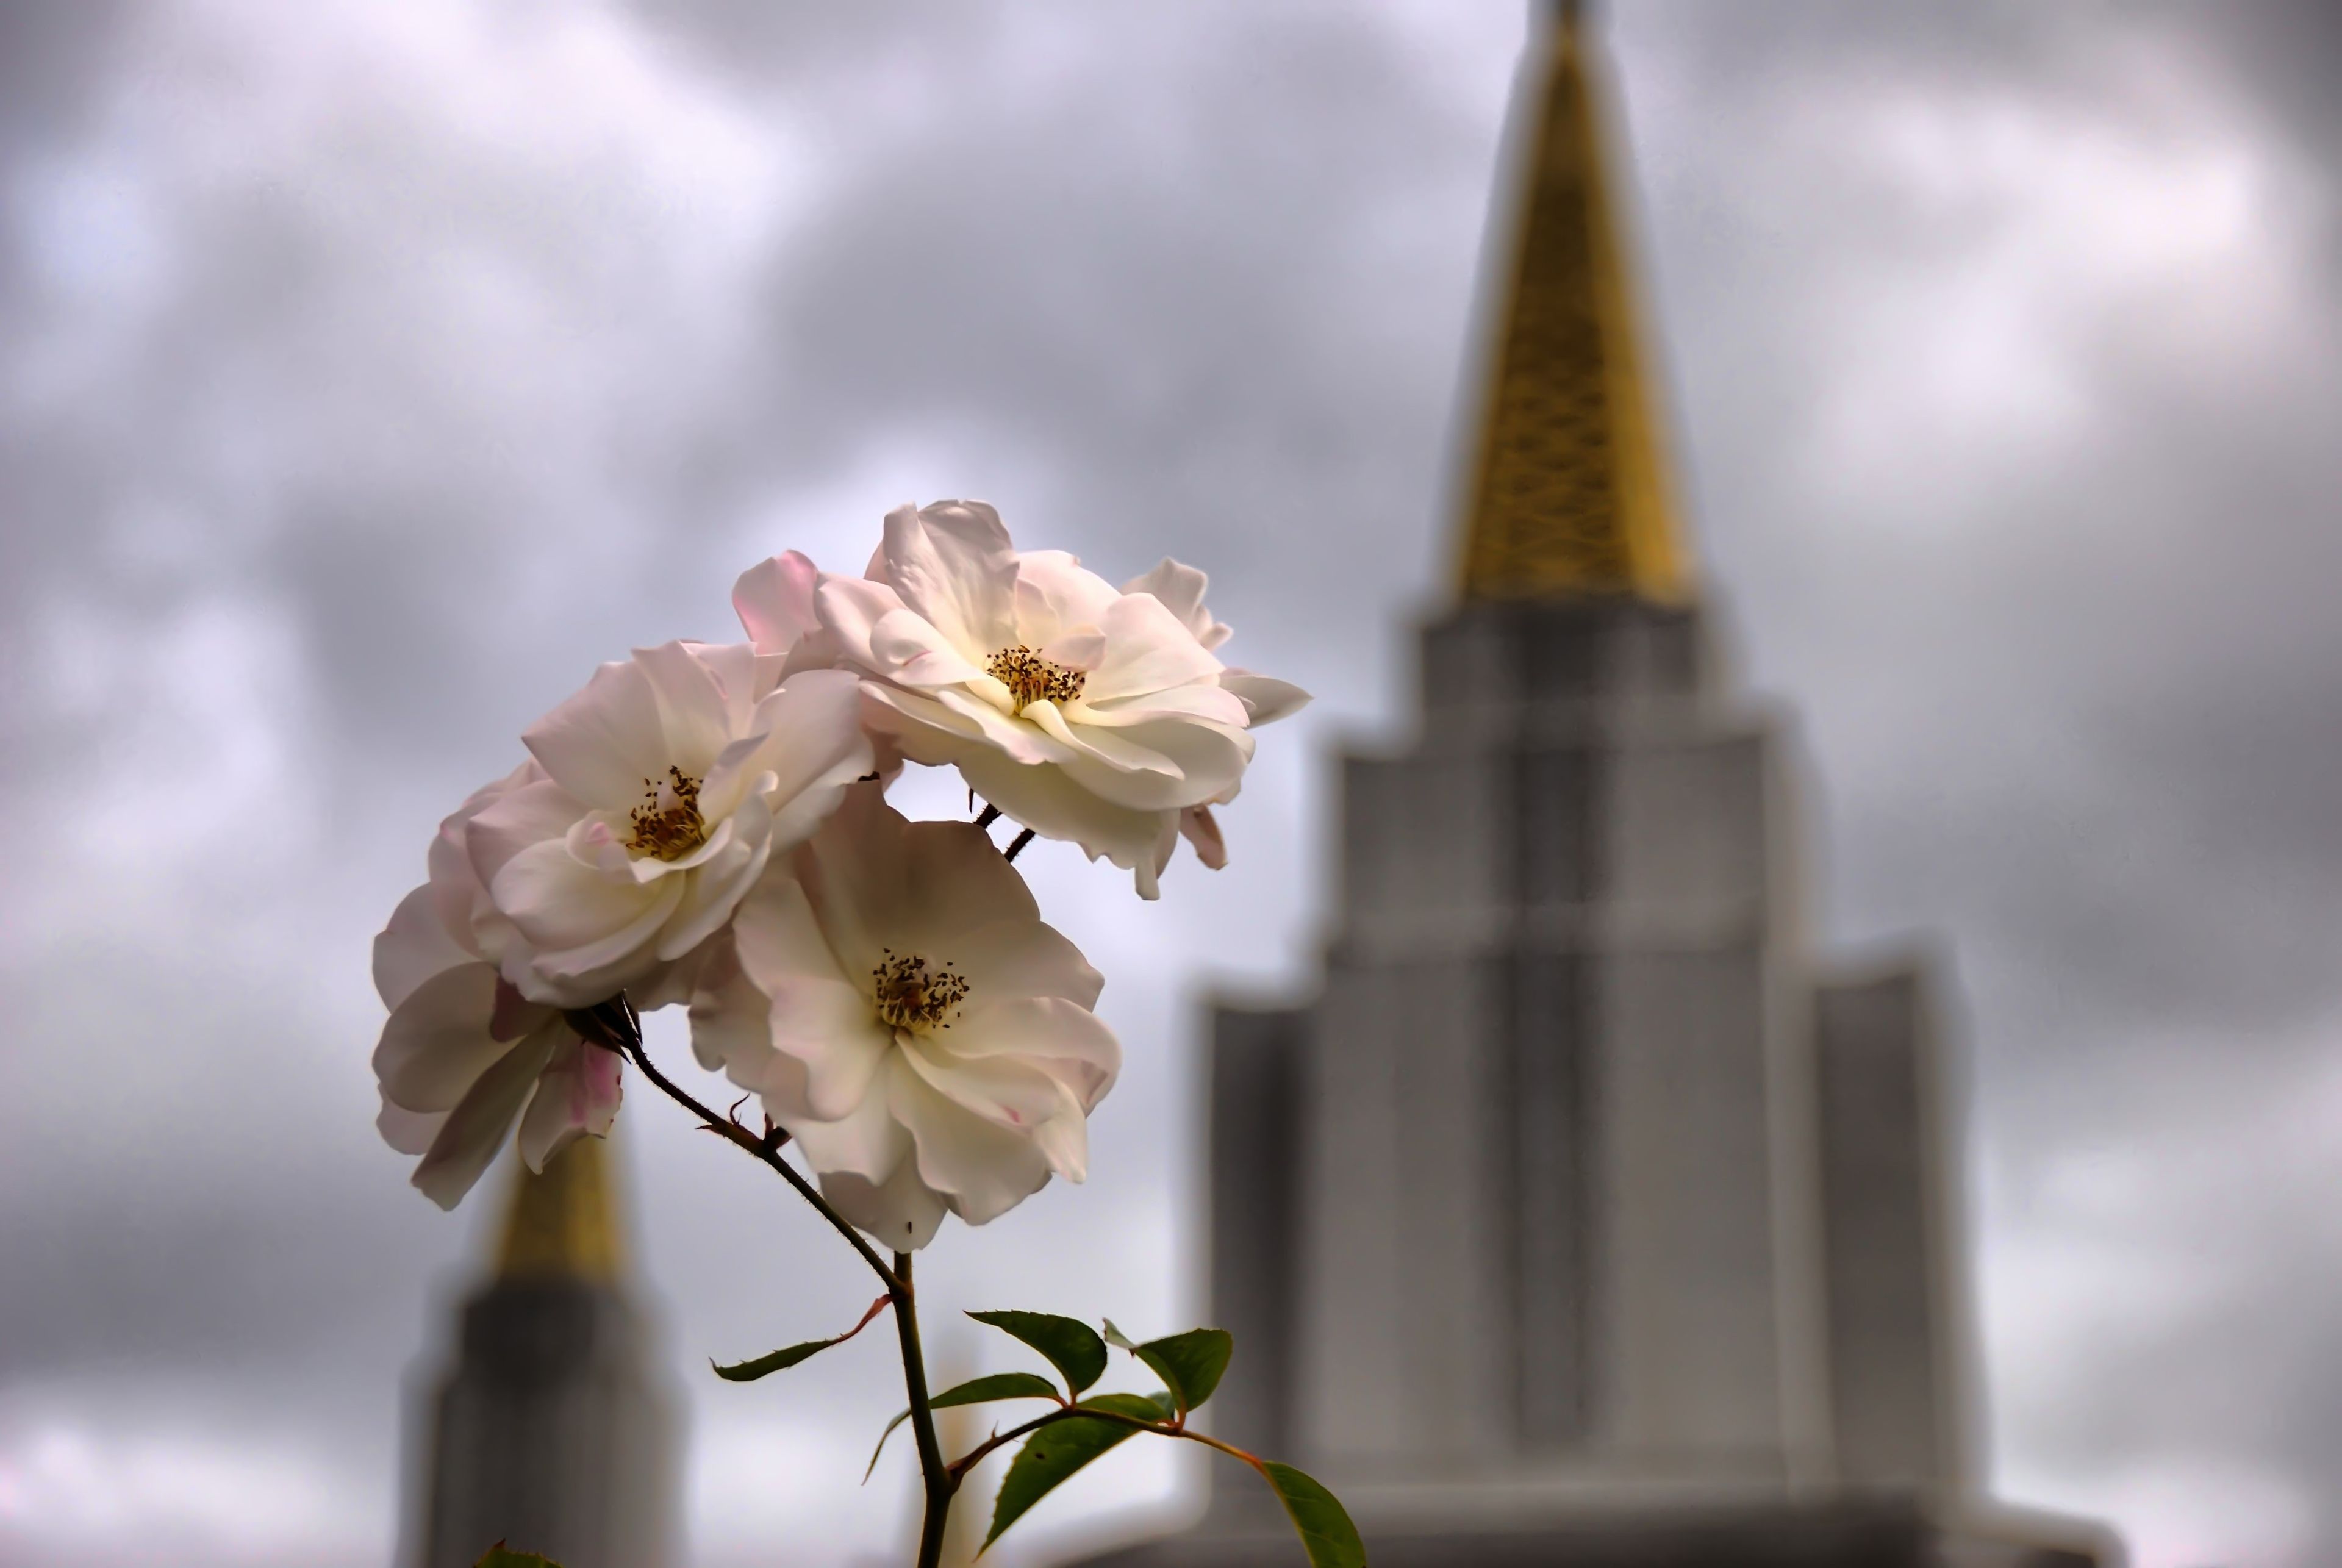 The Oakland California Temple spires, including flowers.